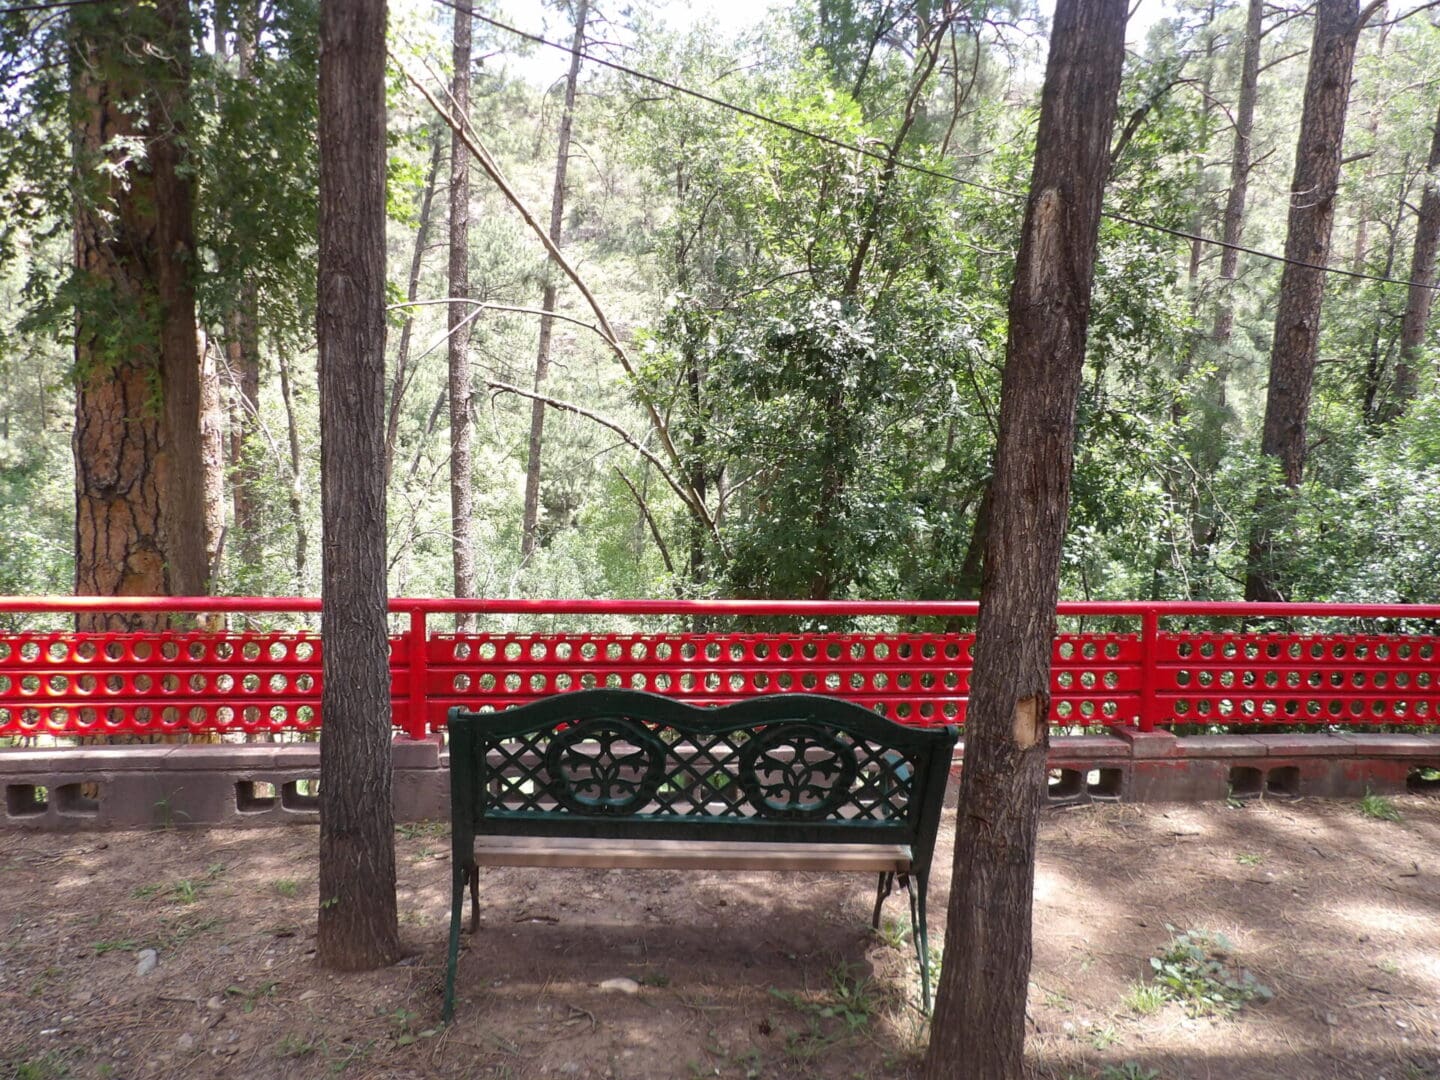 metal seat in between two trees overlooking a forest